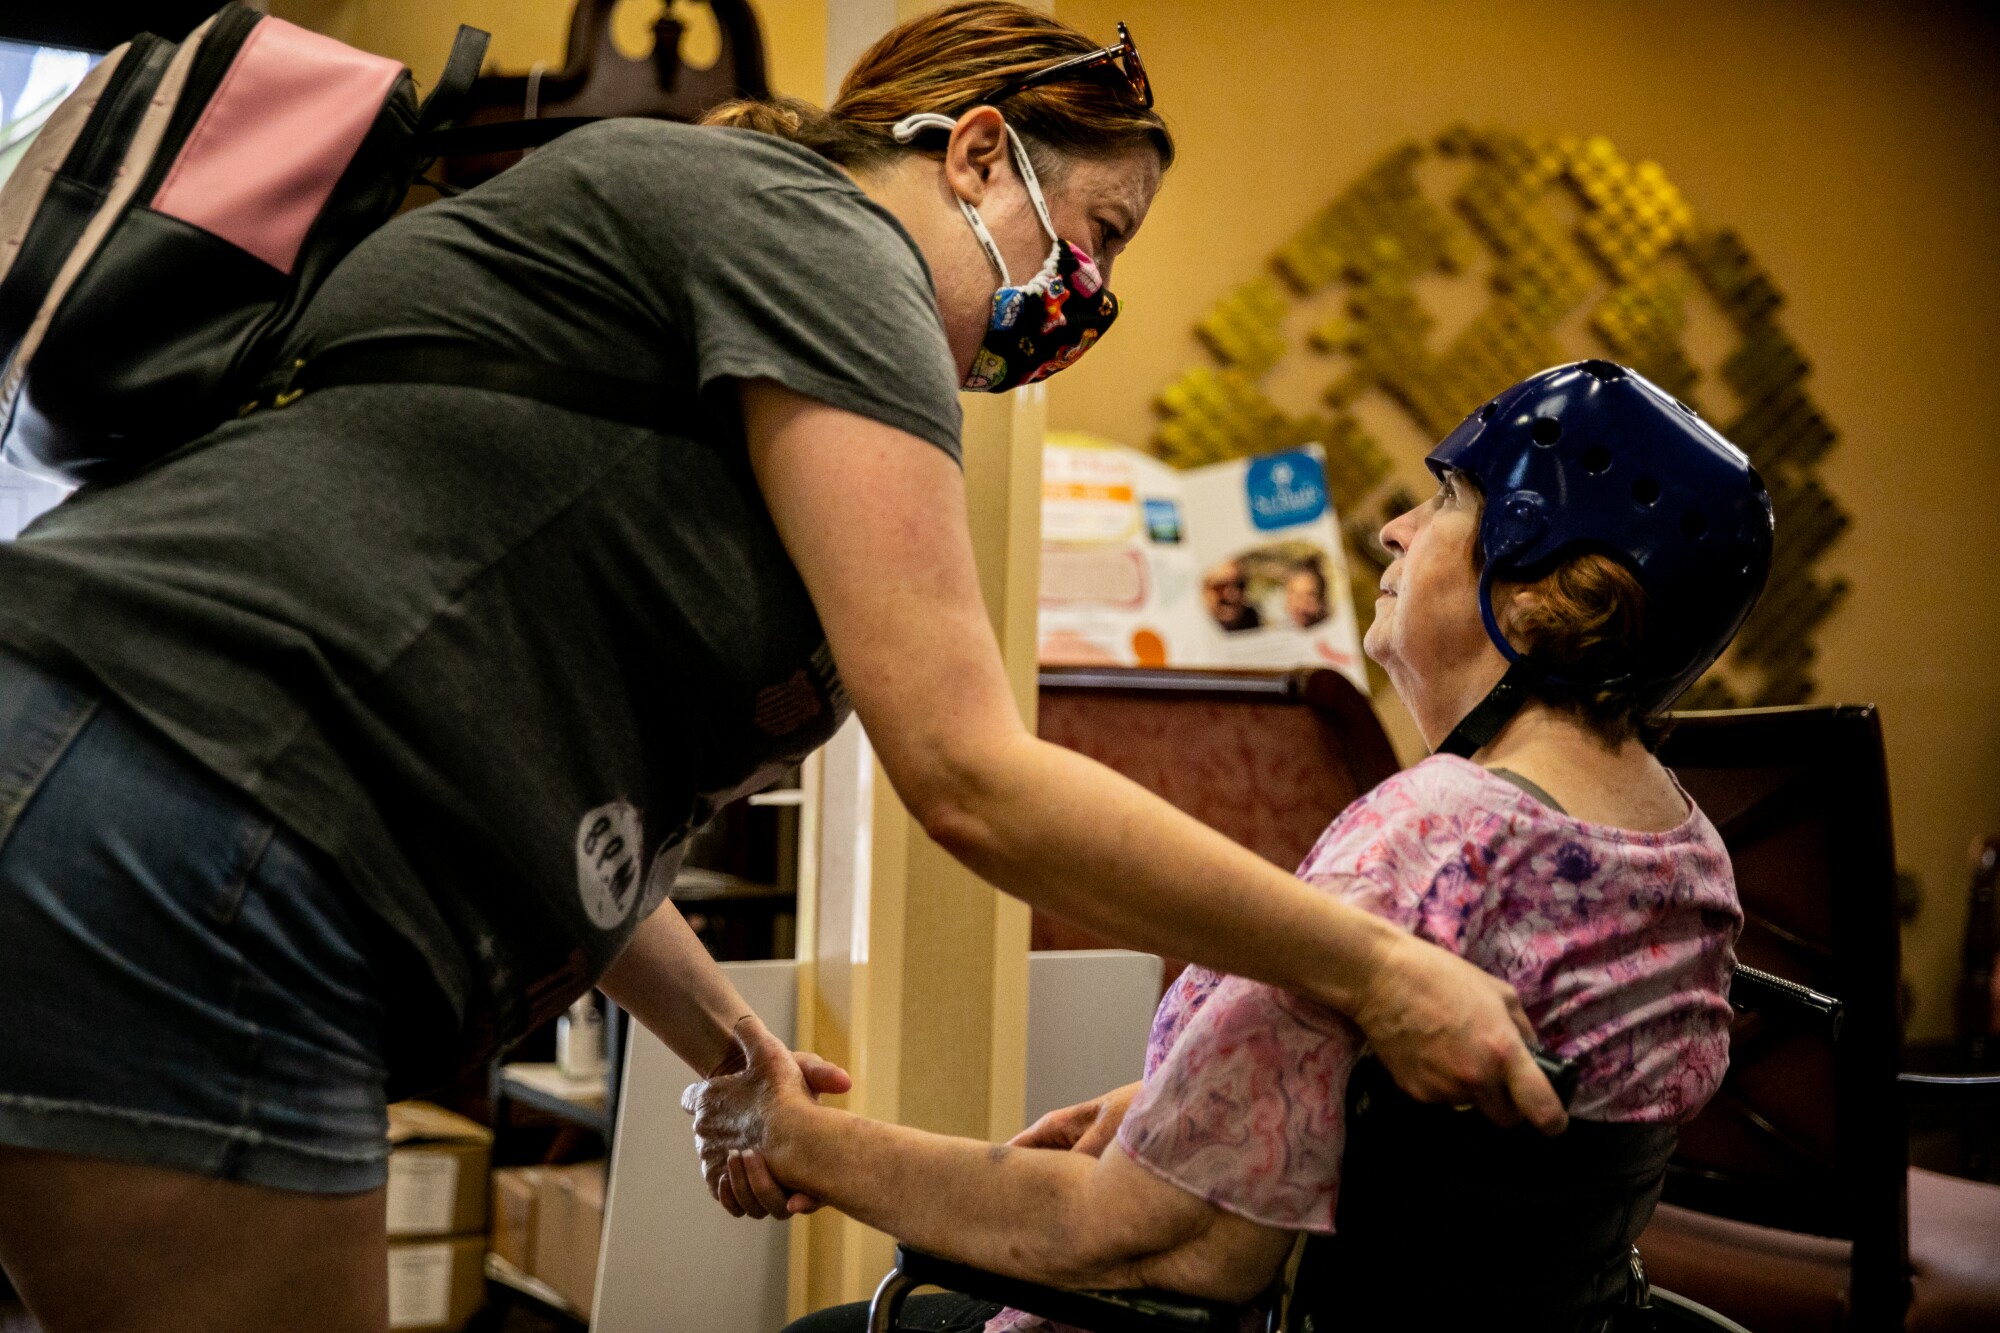 ‘It’s been a tough year and a half.’ Nursing home residents, families relish return of visits